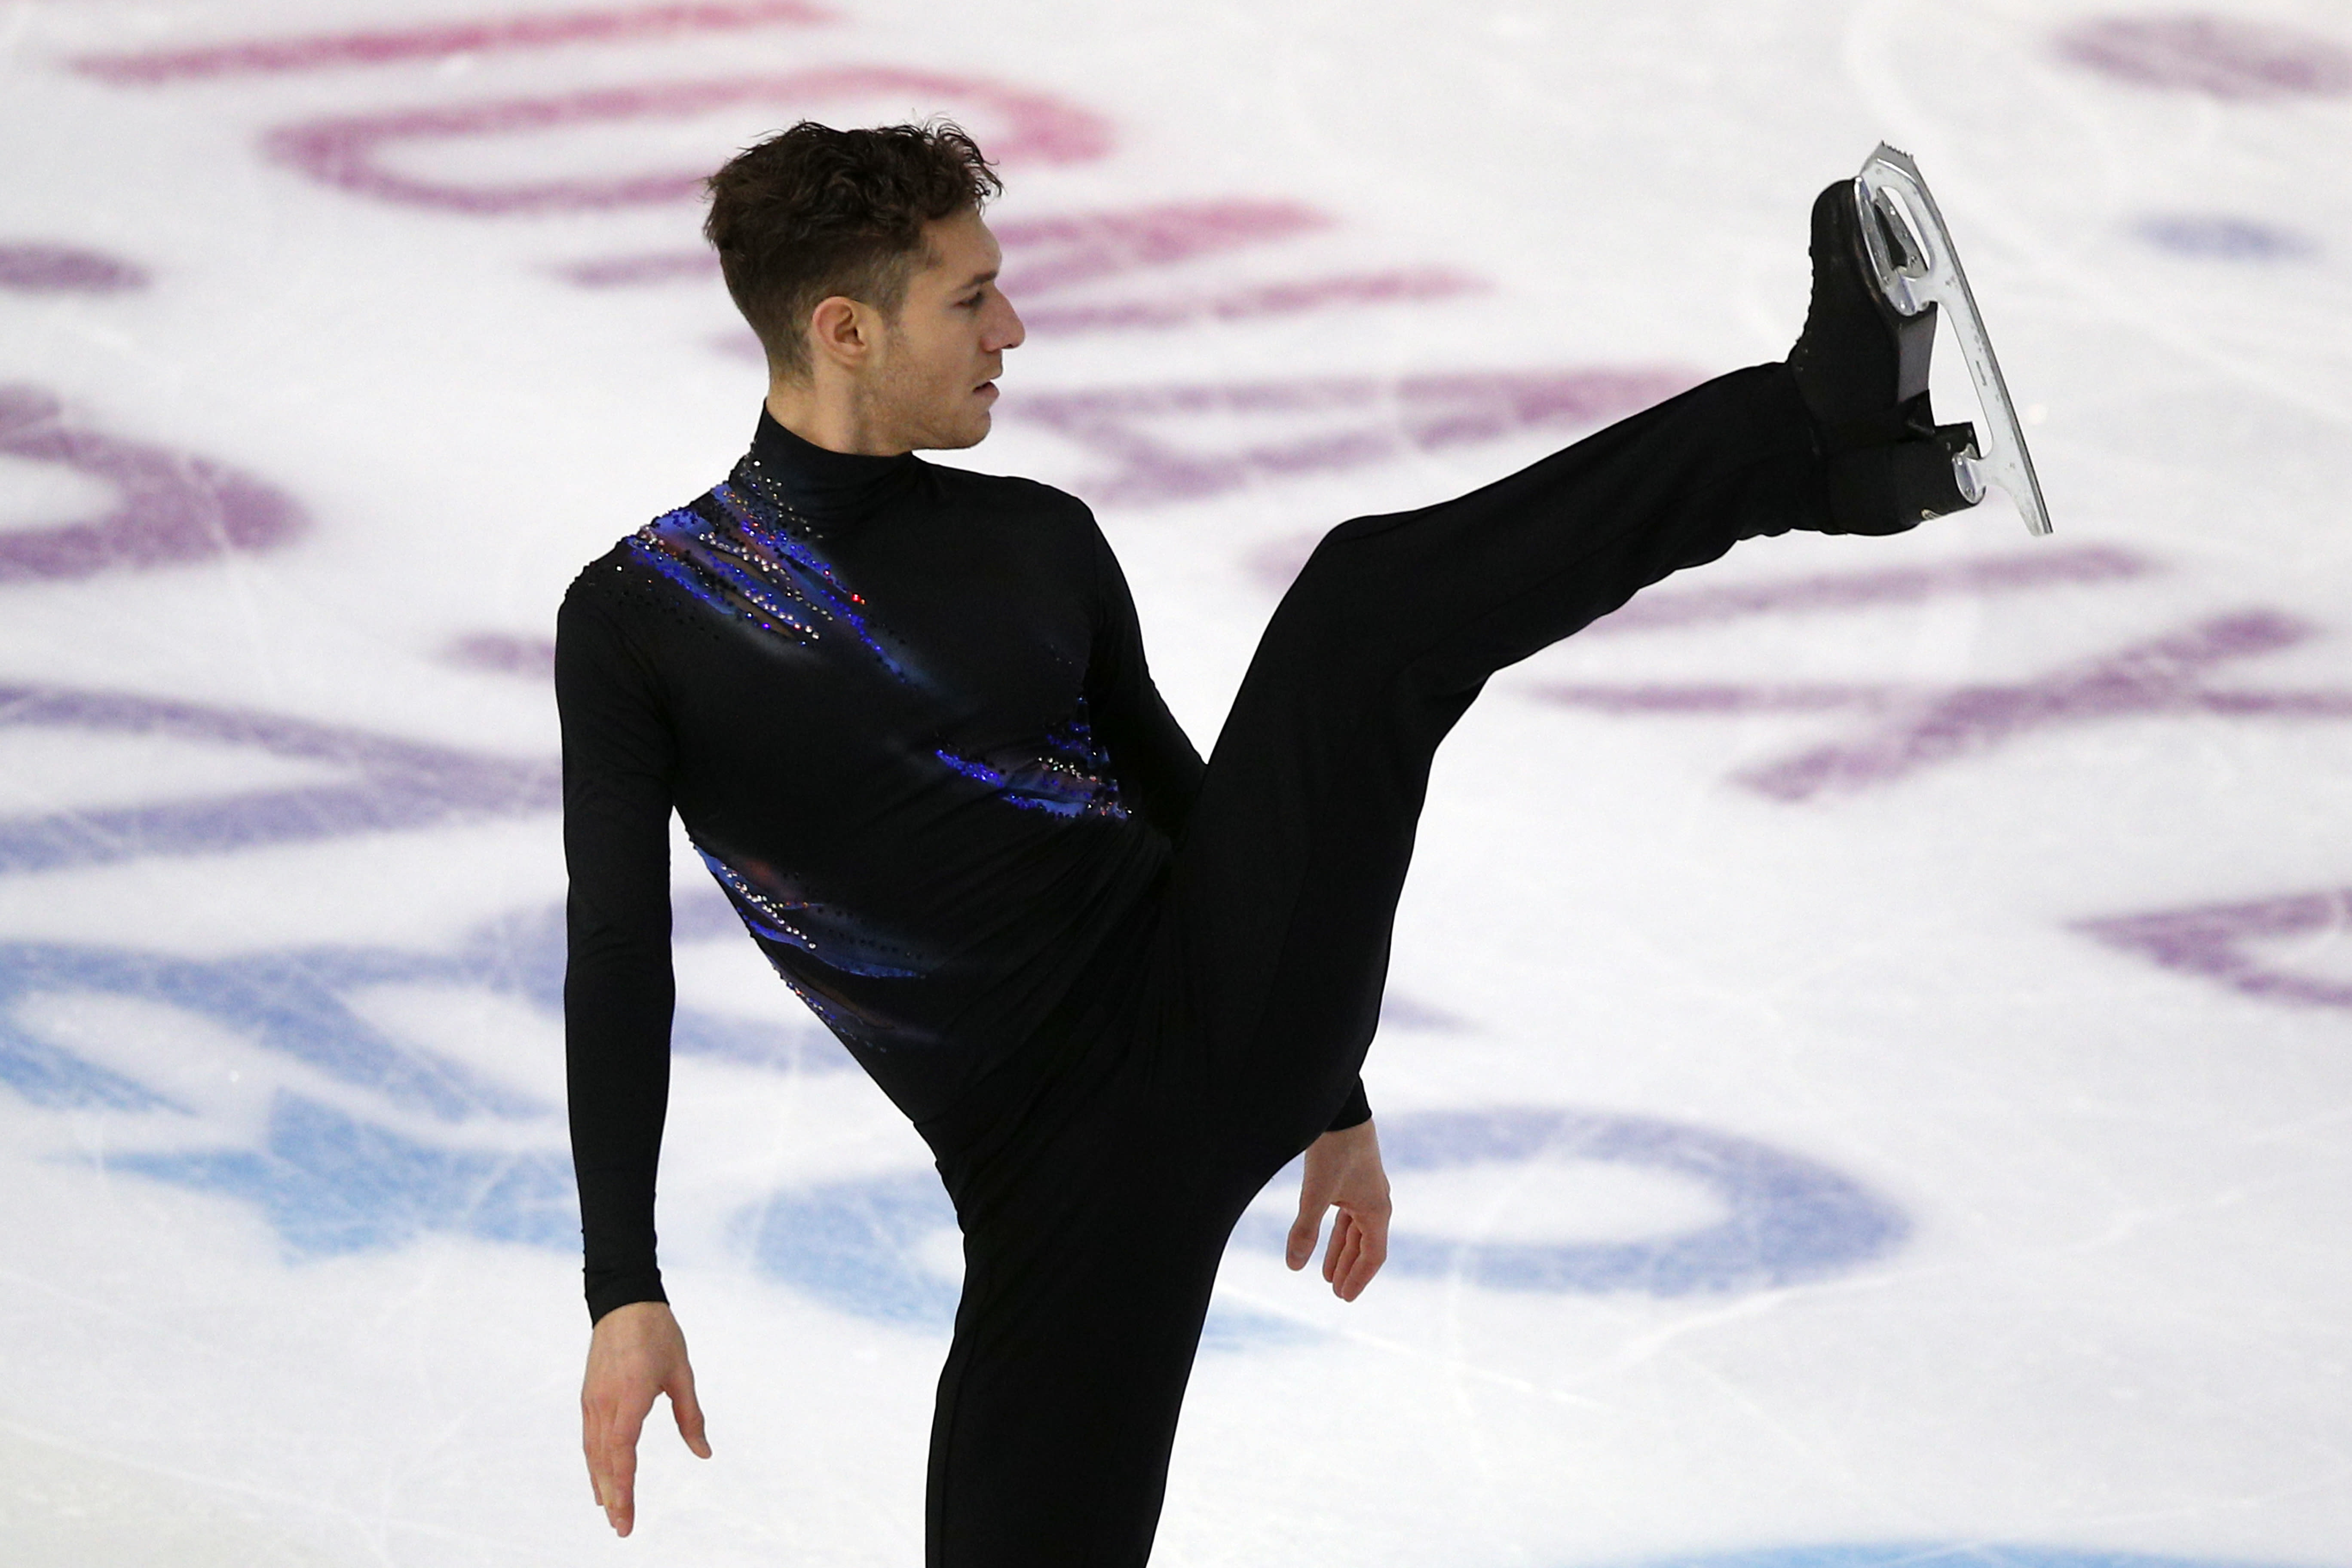 Without a quad, Brown leads figure skating in France